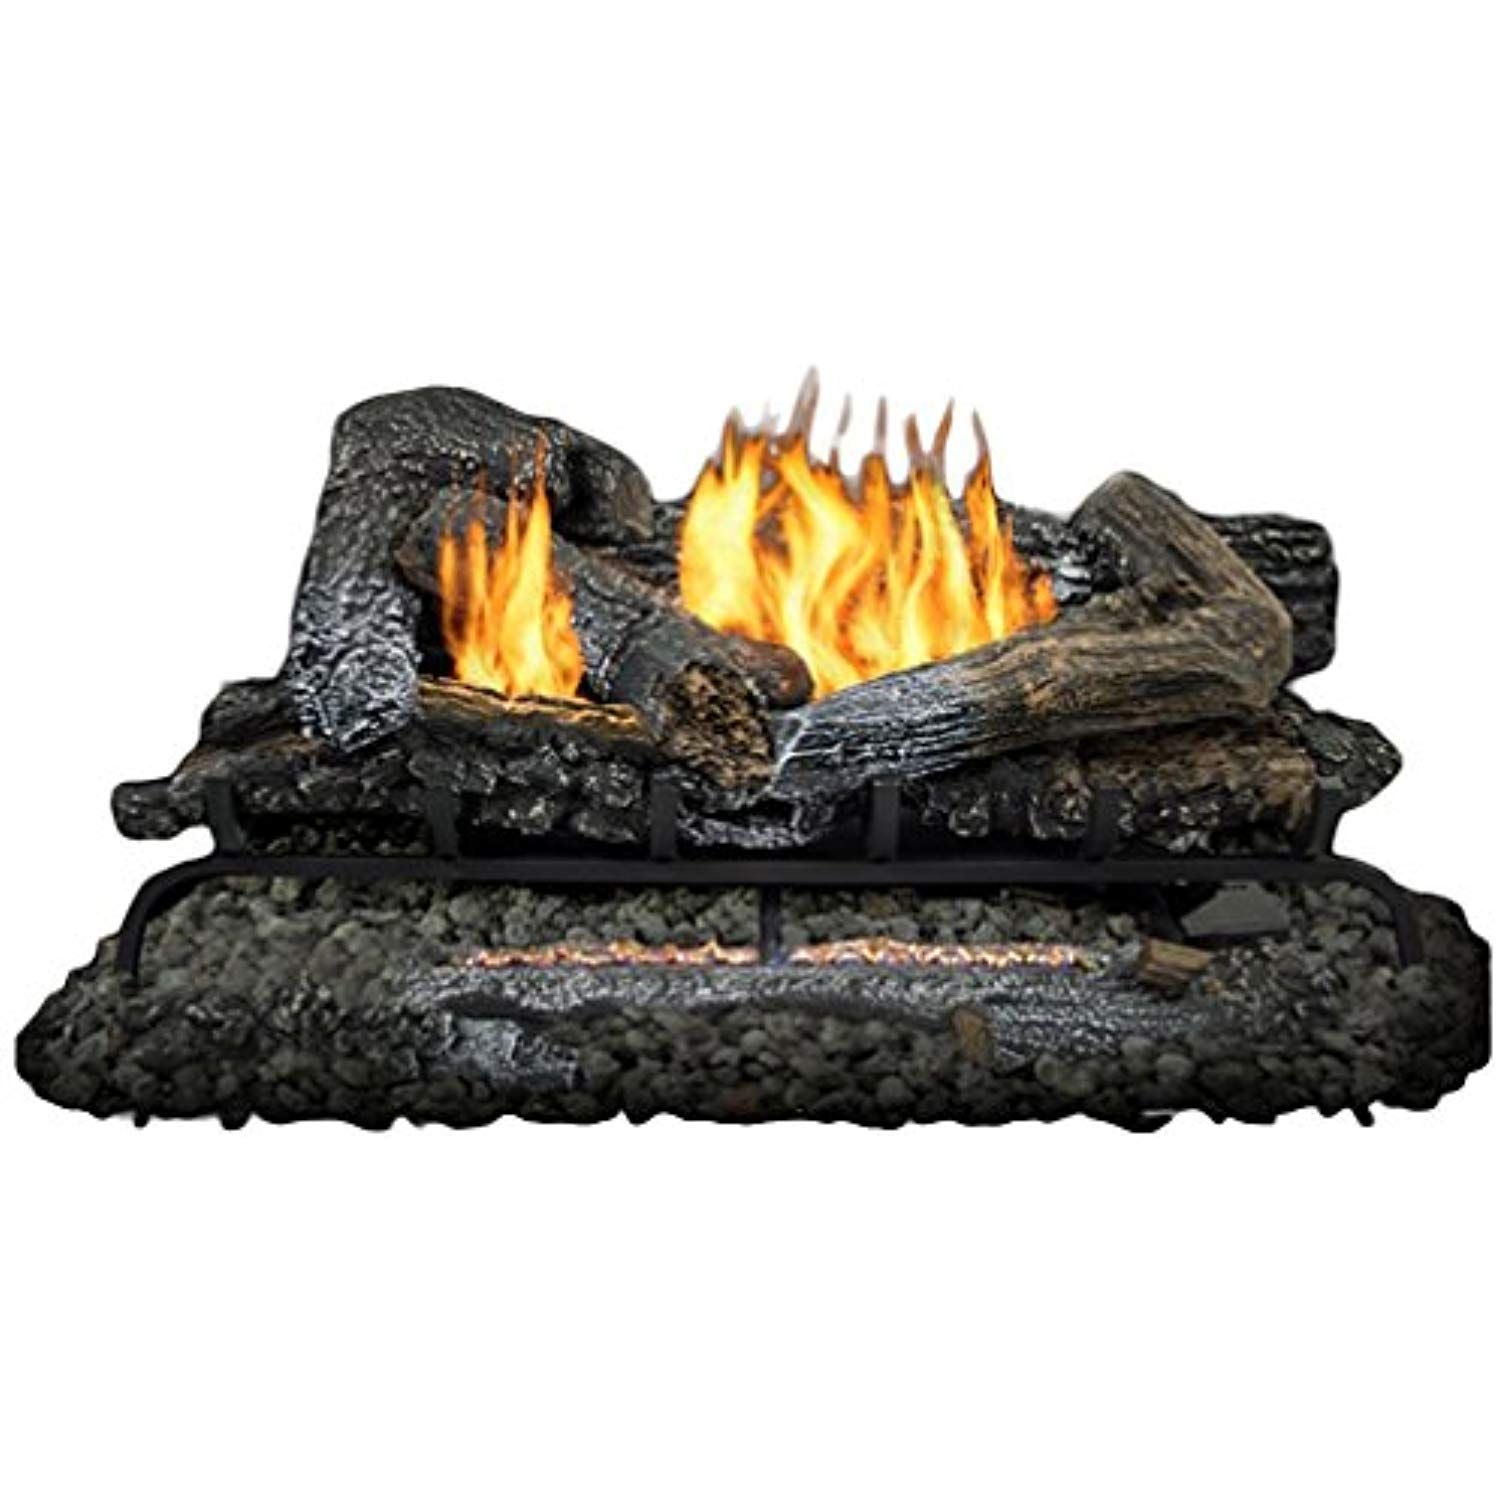 Kozy World Fireplace Luxury Kozy World Gld3070r Vented Gas Log Set 30&quot; Want to Know